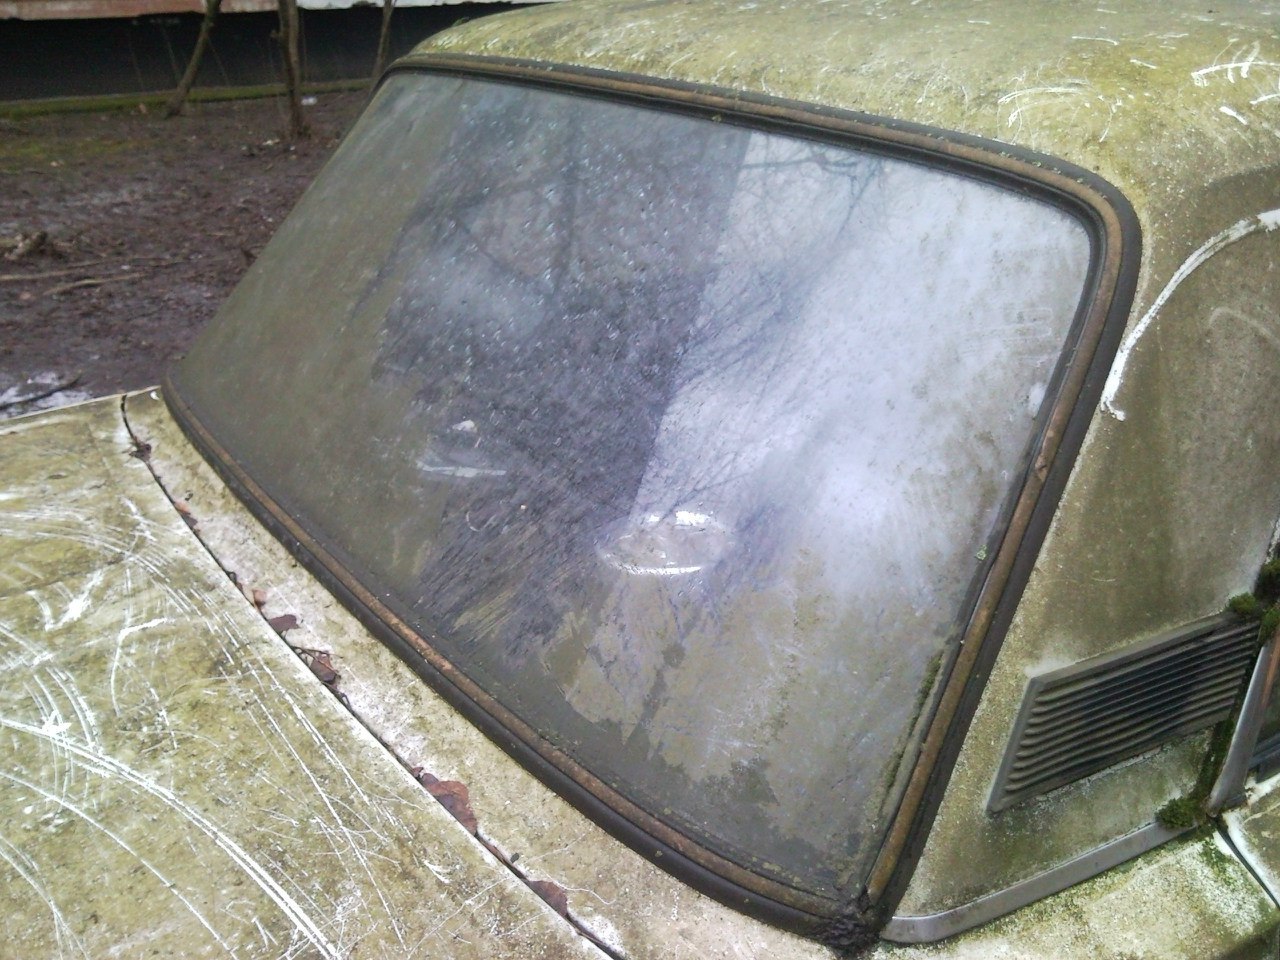 Seen life - the USSR, Made in USSR, Back to USSR, Abandoned, Car, Mold, Trash, Story, Longpost